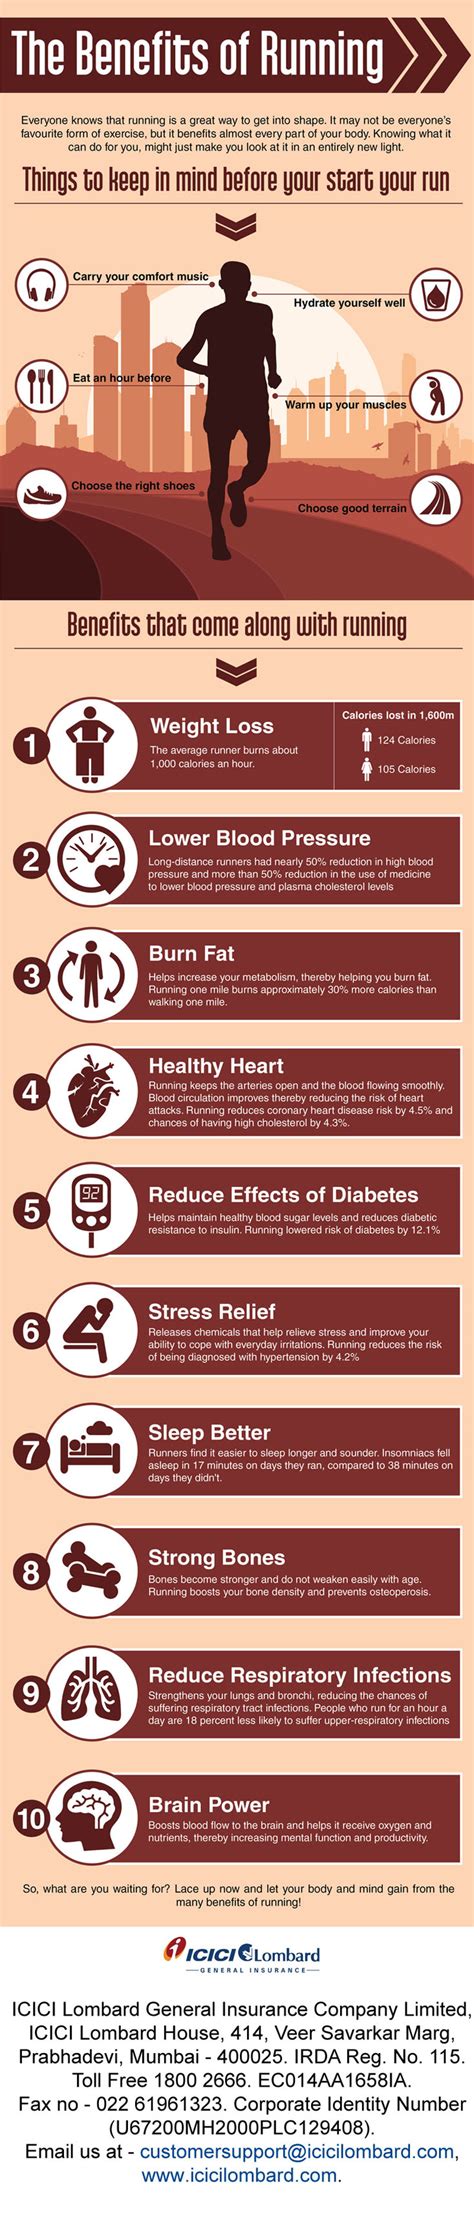 The Benefits Of Running [Infographic]